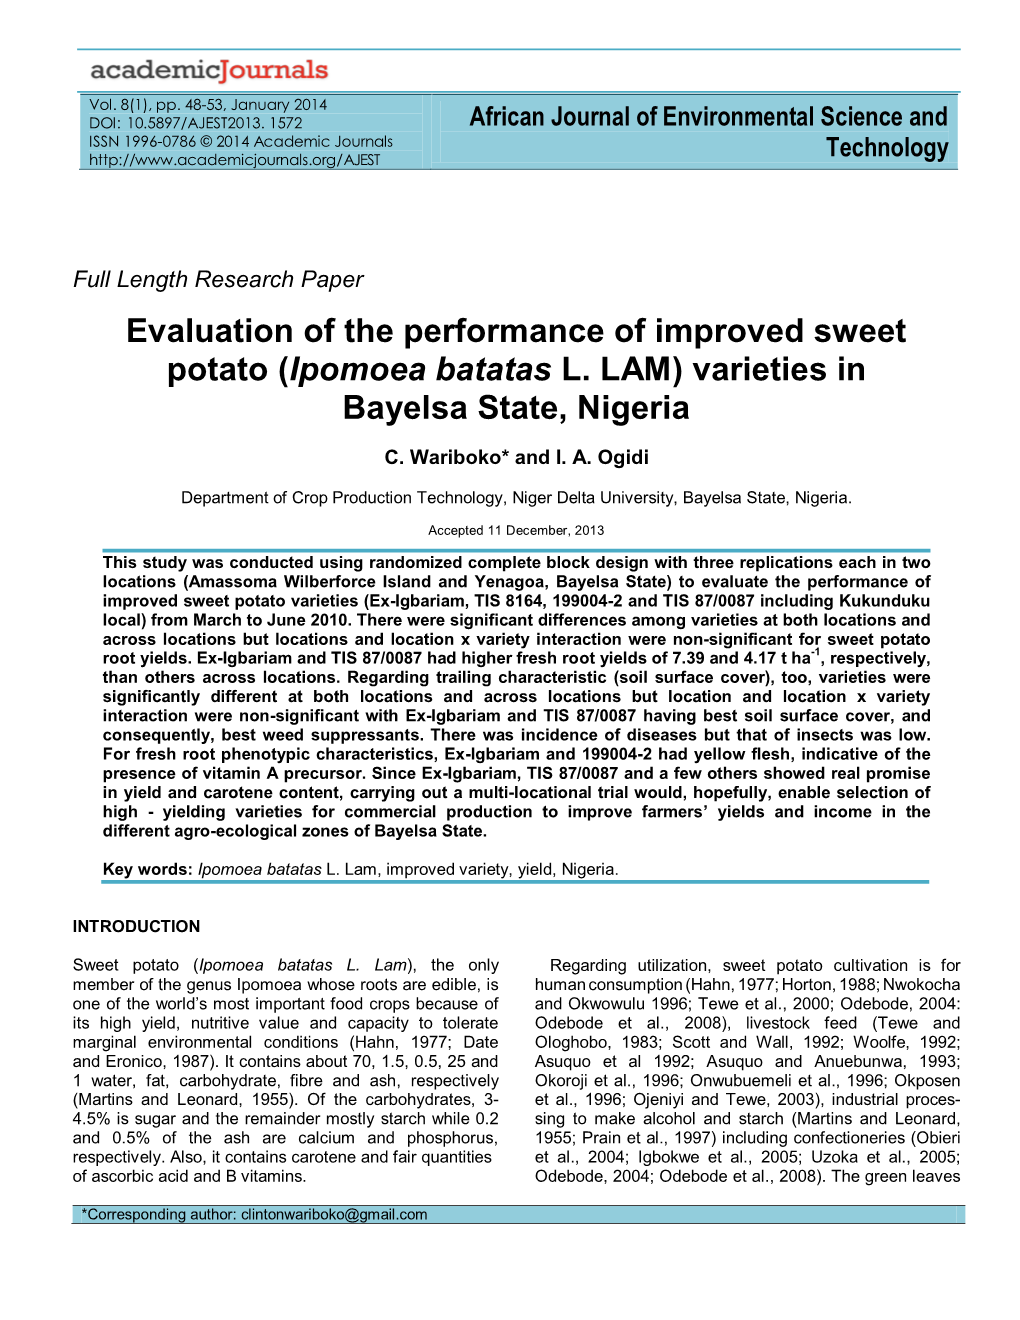 Evaluation of the Performance of Improved Sweet Potato (Ipomoea Batatas L